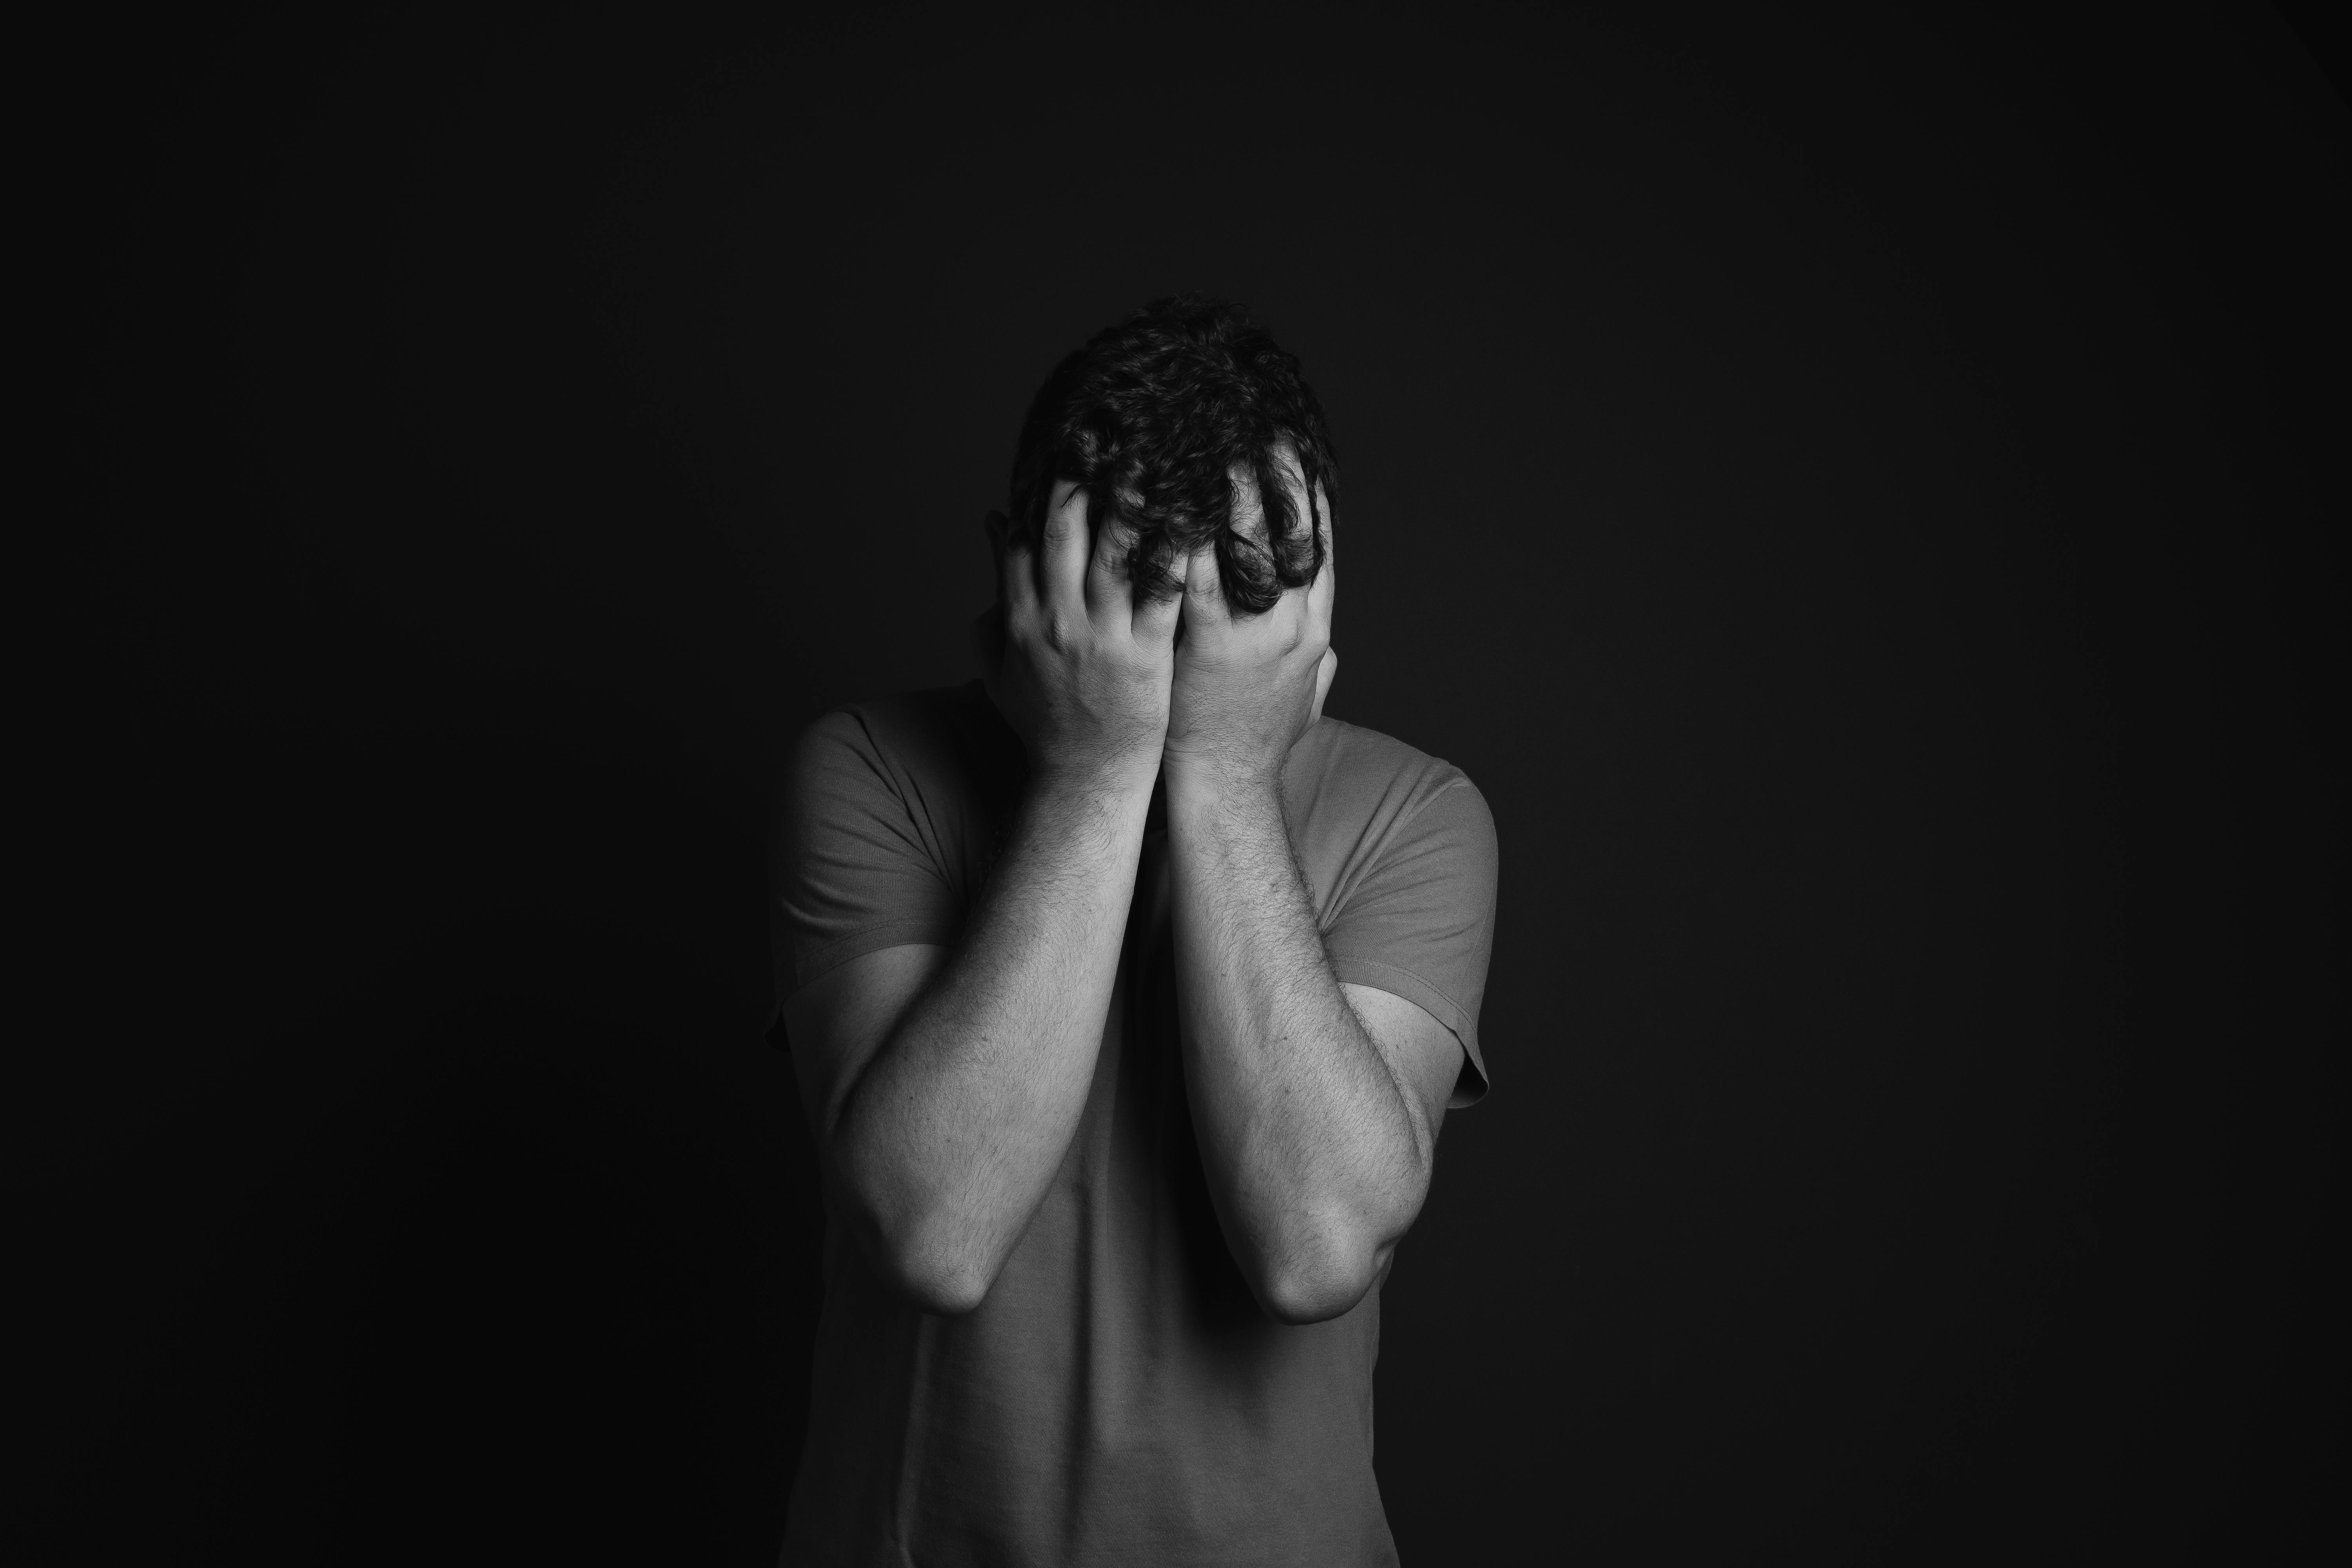 Man hides his face in his hands | Source: Pexels